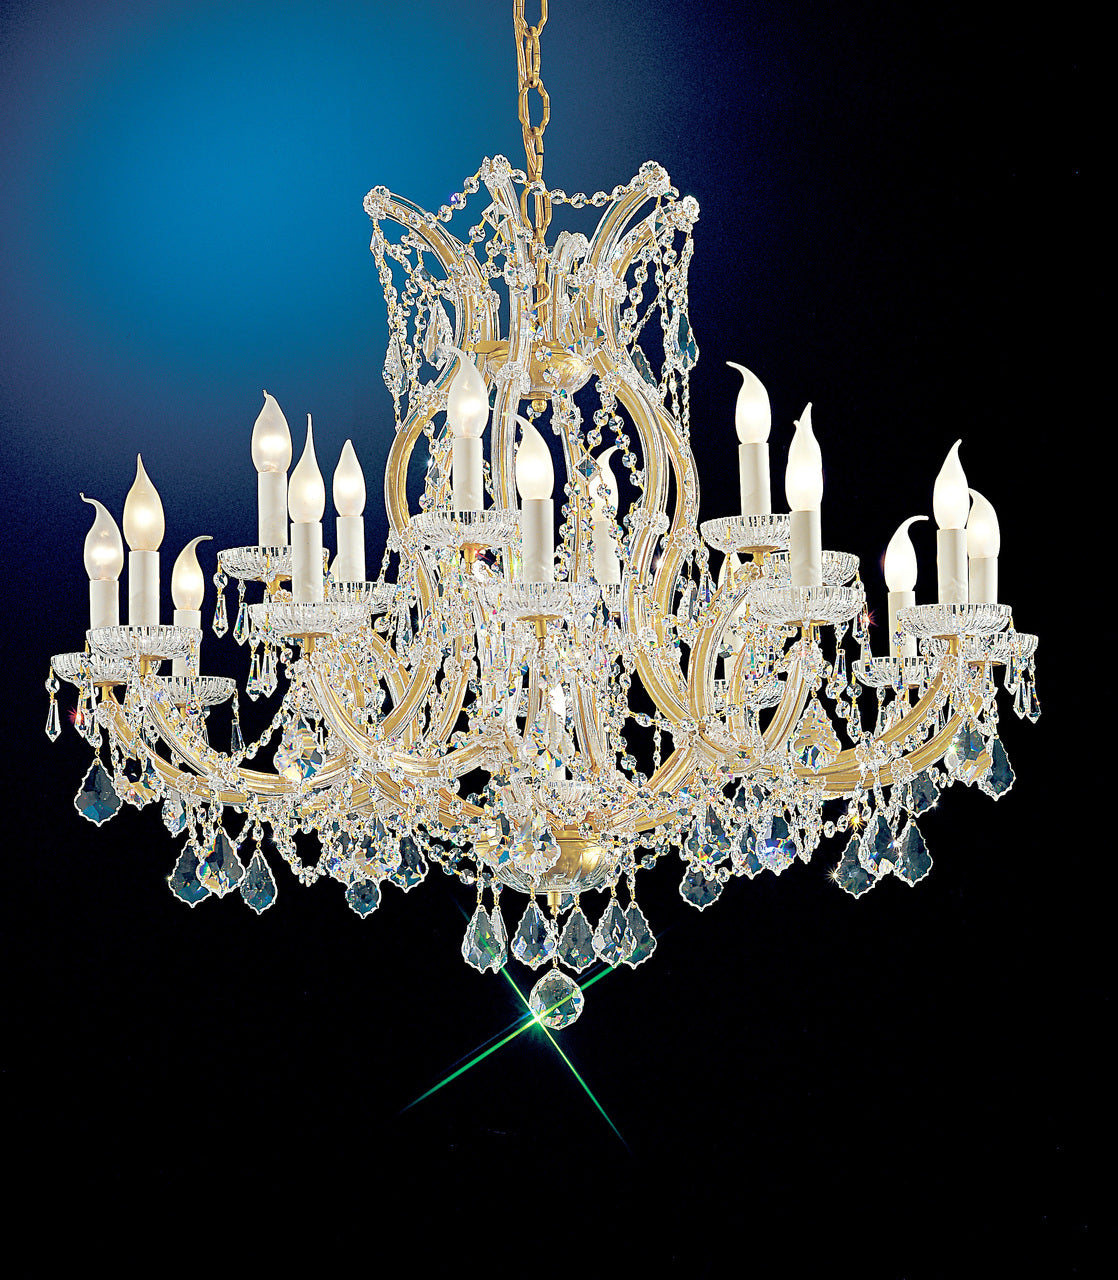 Classic Lighting 8118 OWG S Maria Theresa Traditional Crystal Chandelier in Olde World Gold (Imported from Italy)